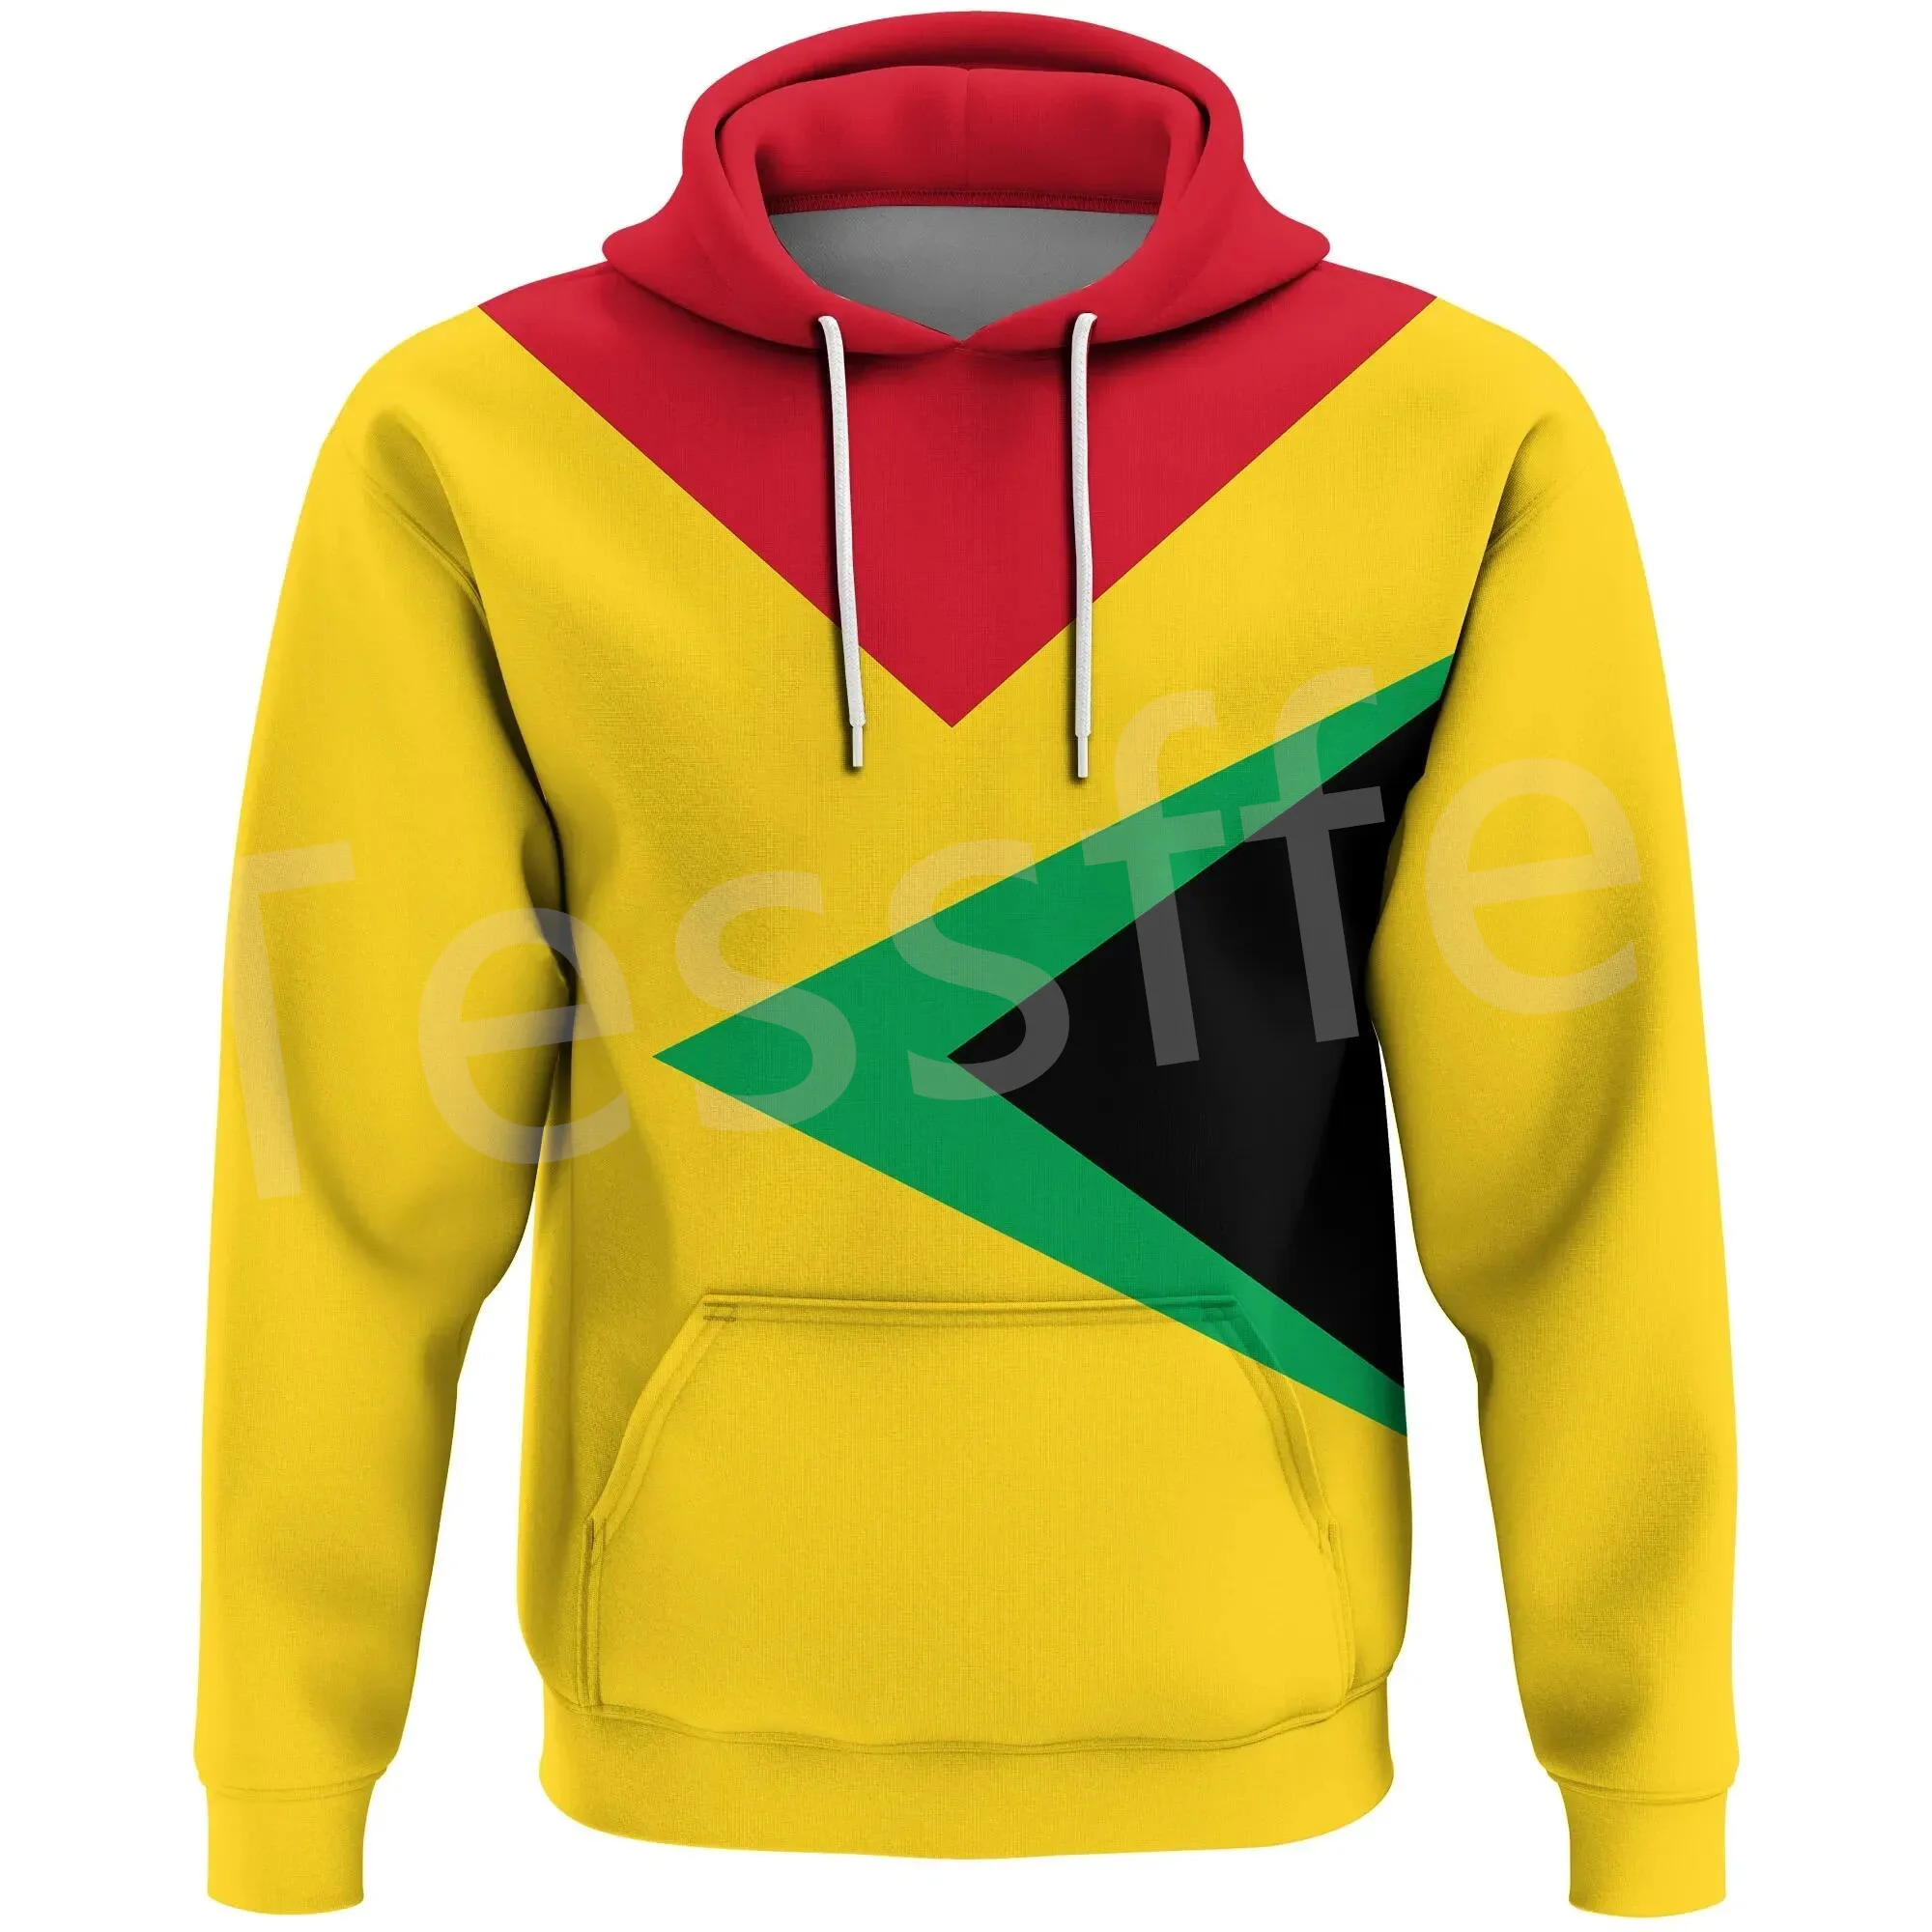 Tessffel South America County Guyana Flag Tribe Tattoo Retro Tracksuit 3DPrint Men/Women Pullover Casual Funny Jacket Hoodies A2 hiphop men s tracksuit hooded 2 pieces set stand colar hoodies tie feet retro pants casual streewear loose tops men s clothing